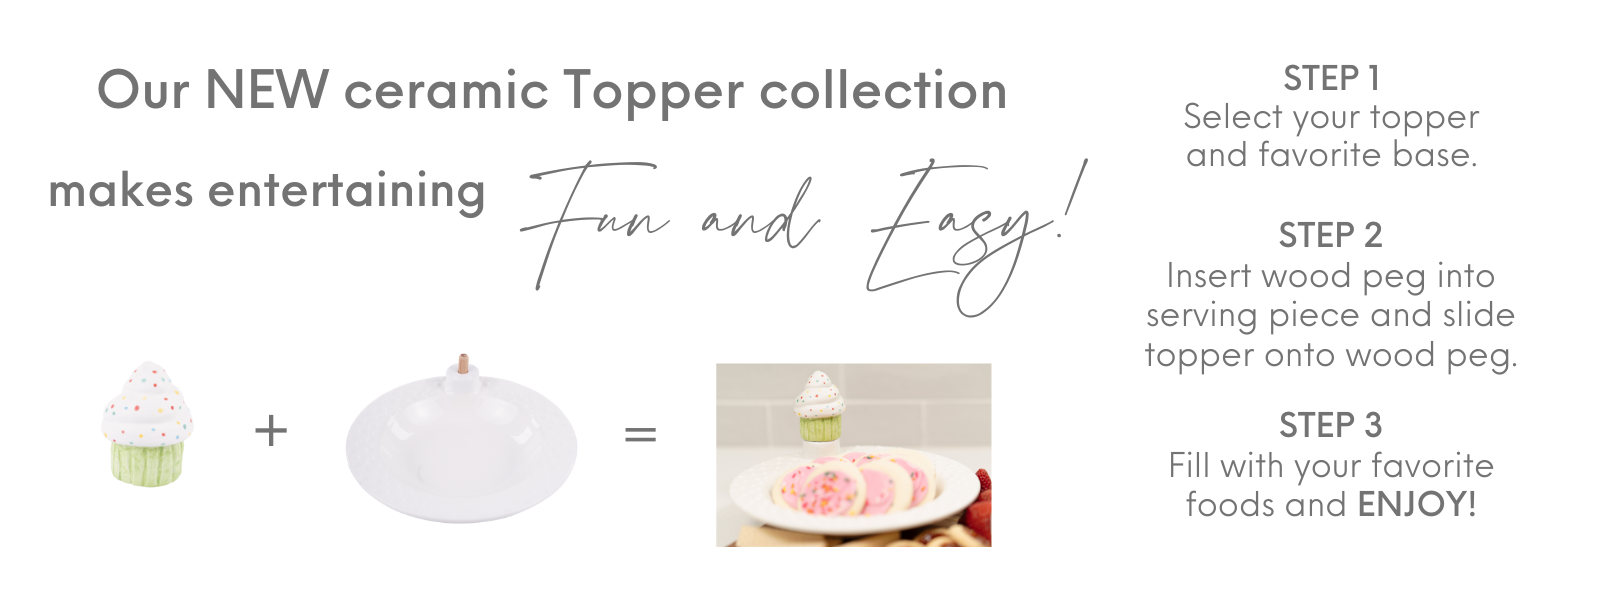 our new ceramic topper collection makes entertaining fun and easy!